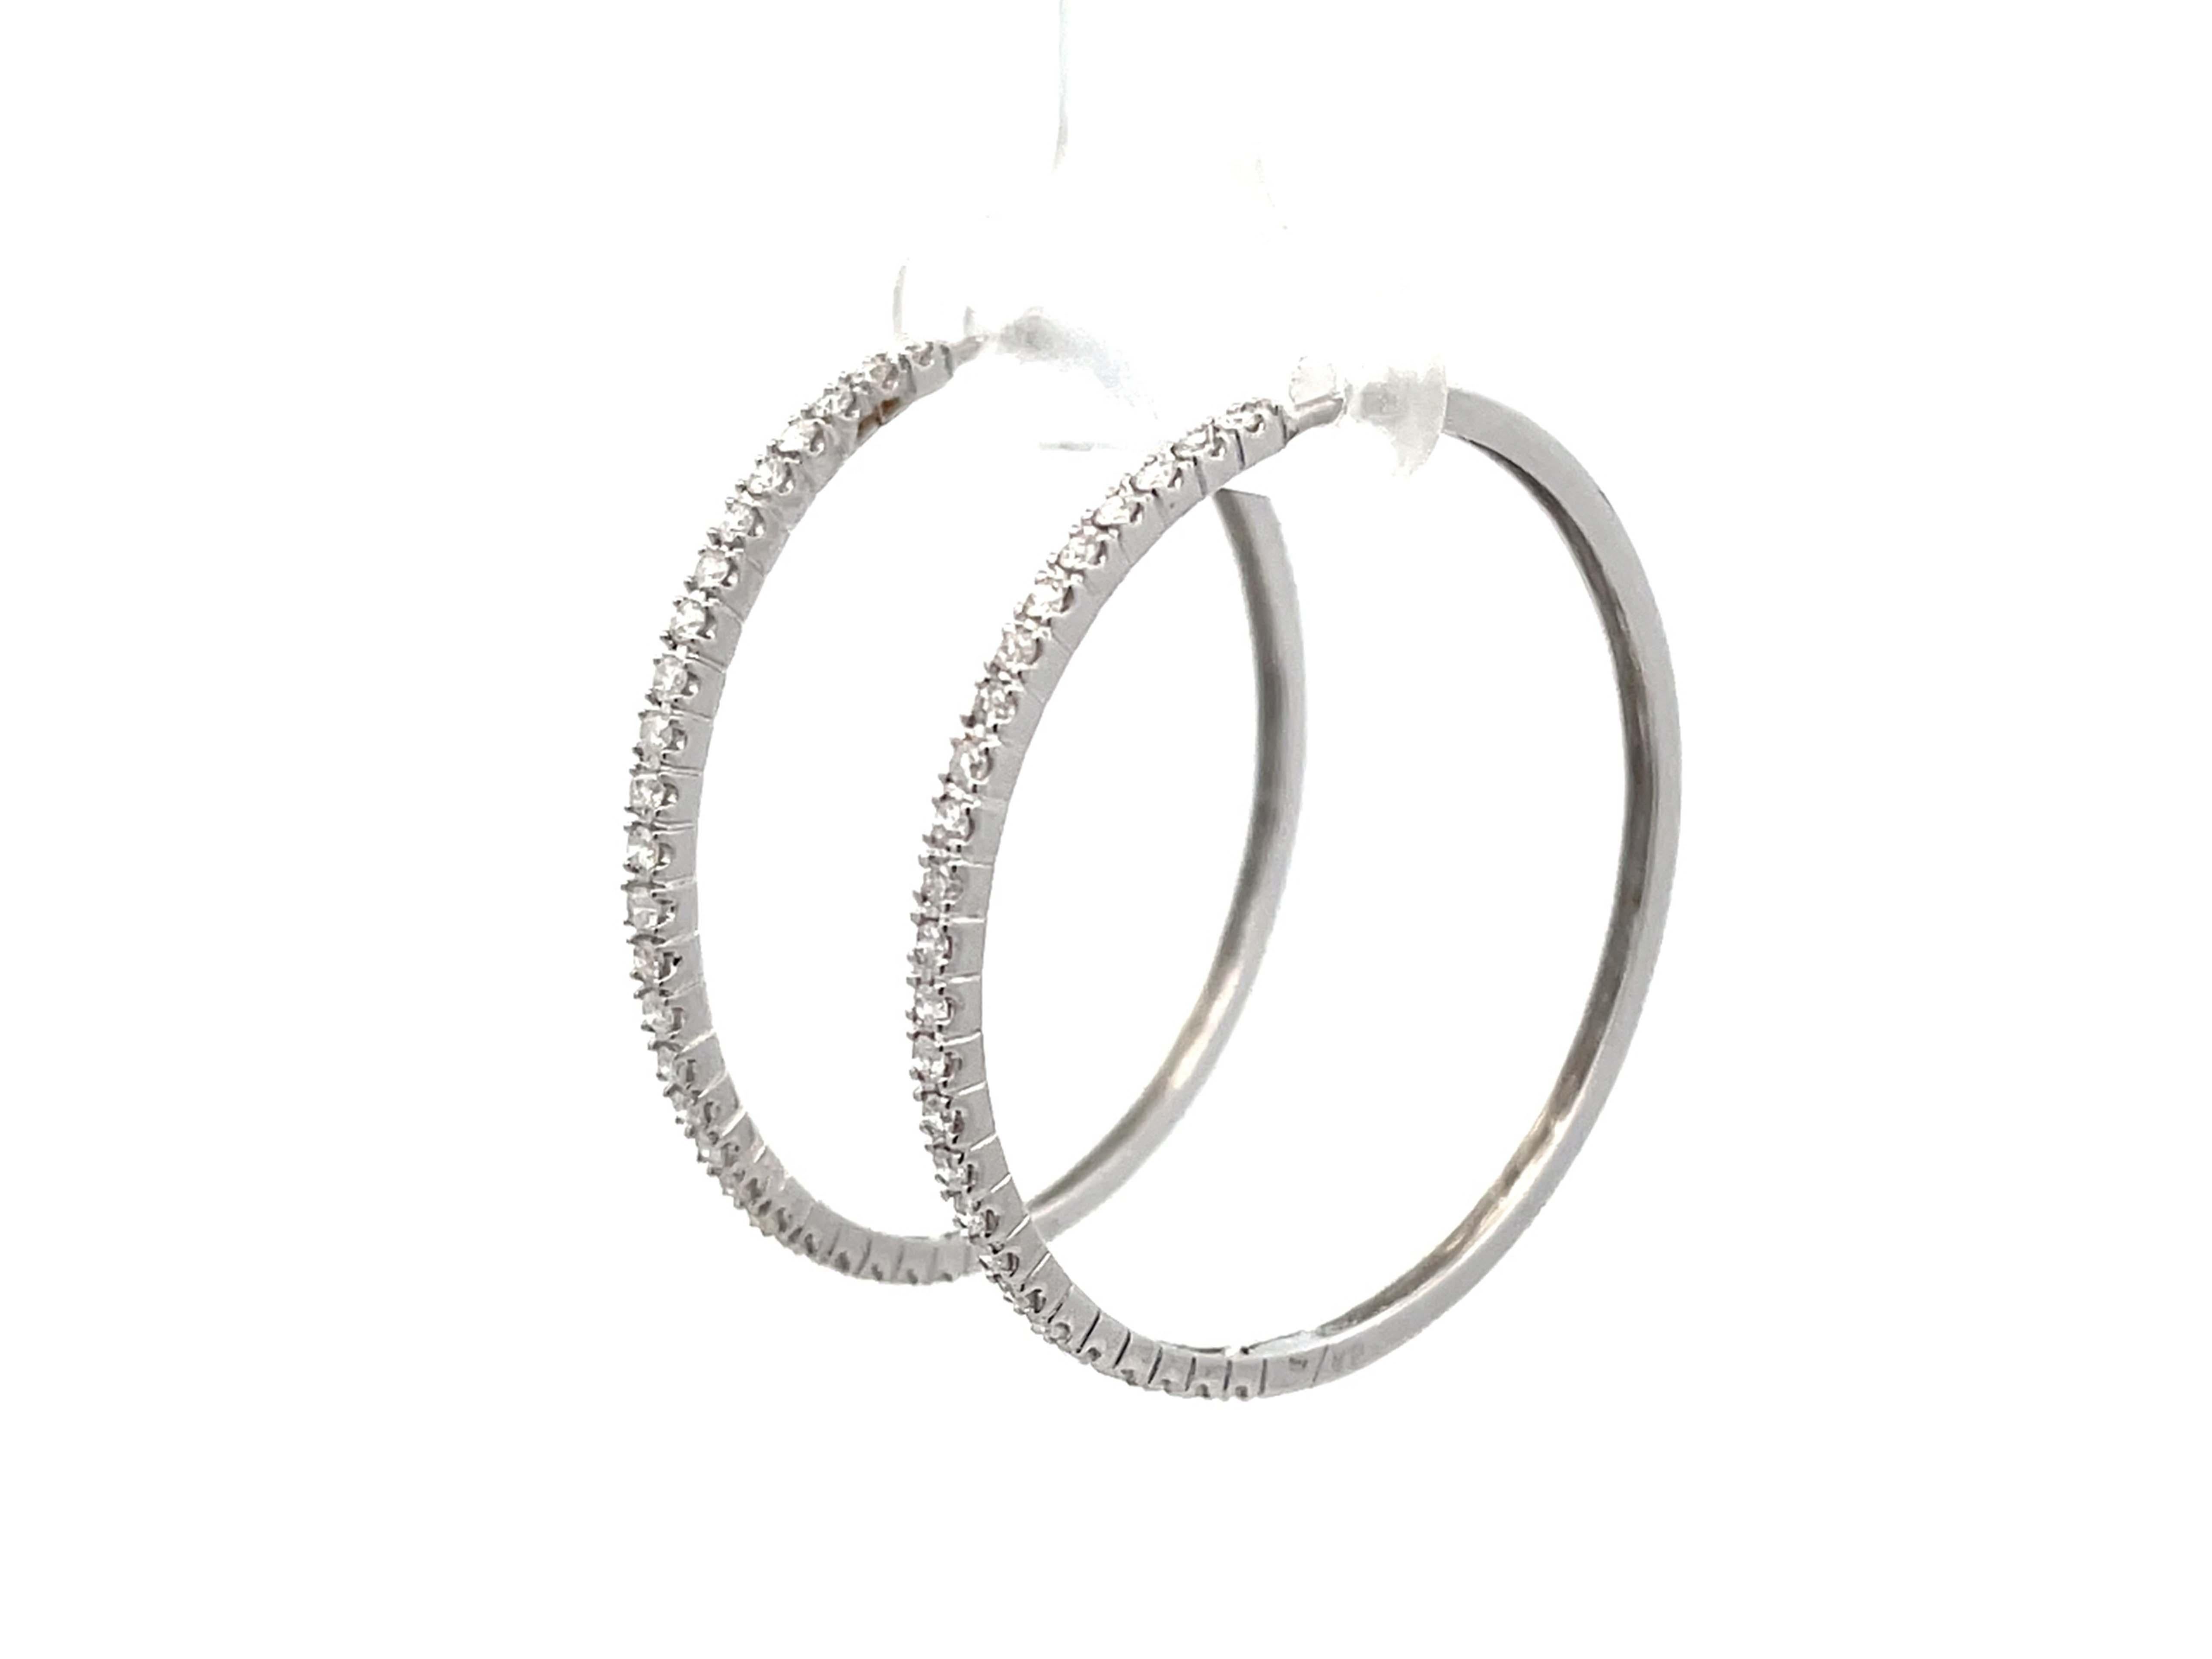 Diamond Hoop Earrings 18K Solid White Gold  In Excellent Condition For Sale In Honolulu, HI